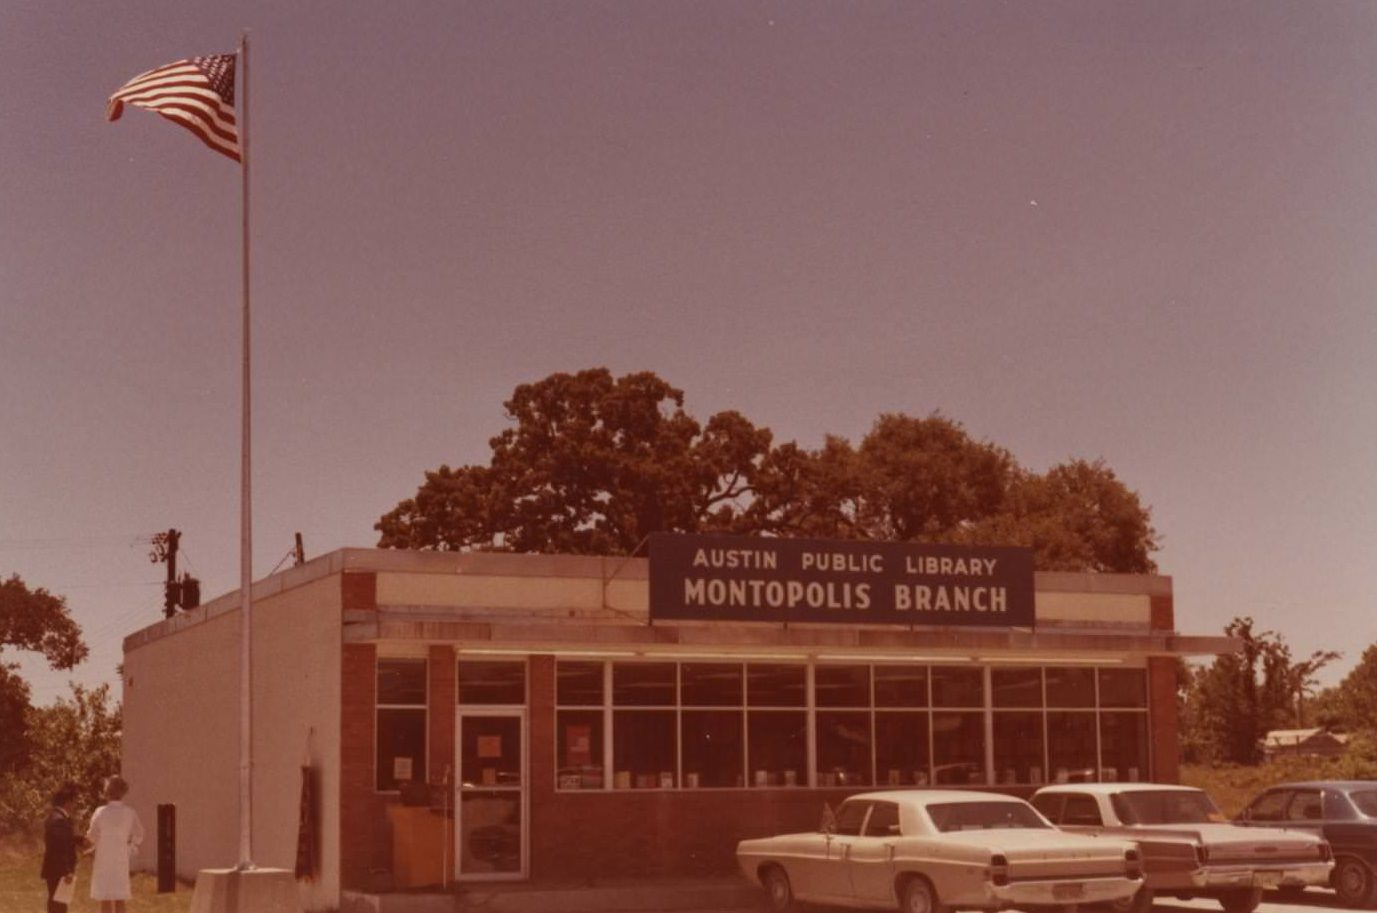 Flagpole inauguration at the Montopolis Branch of the Austin Public Library on July 4th, 1971.